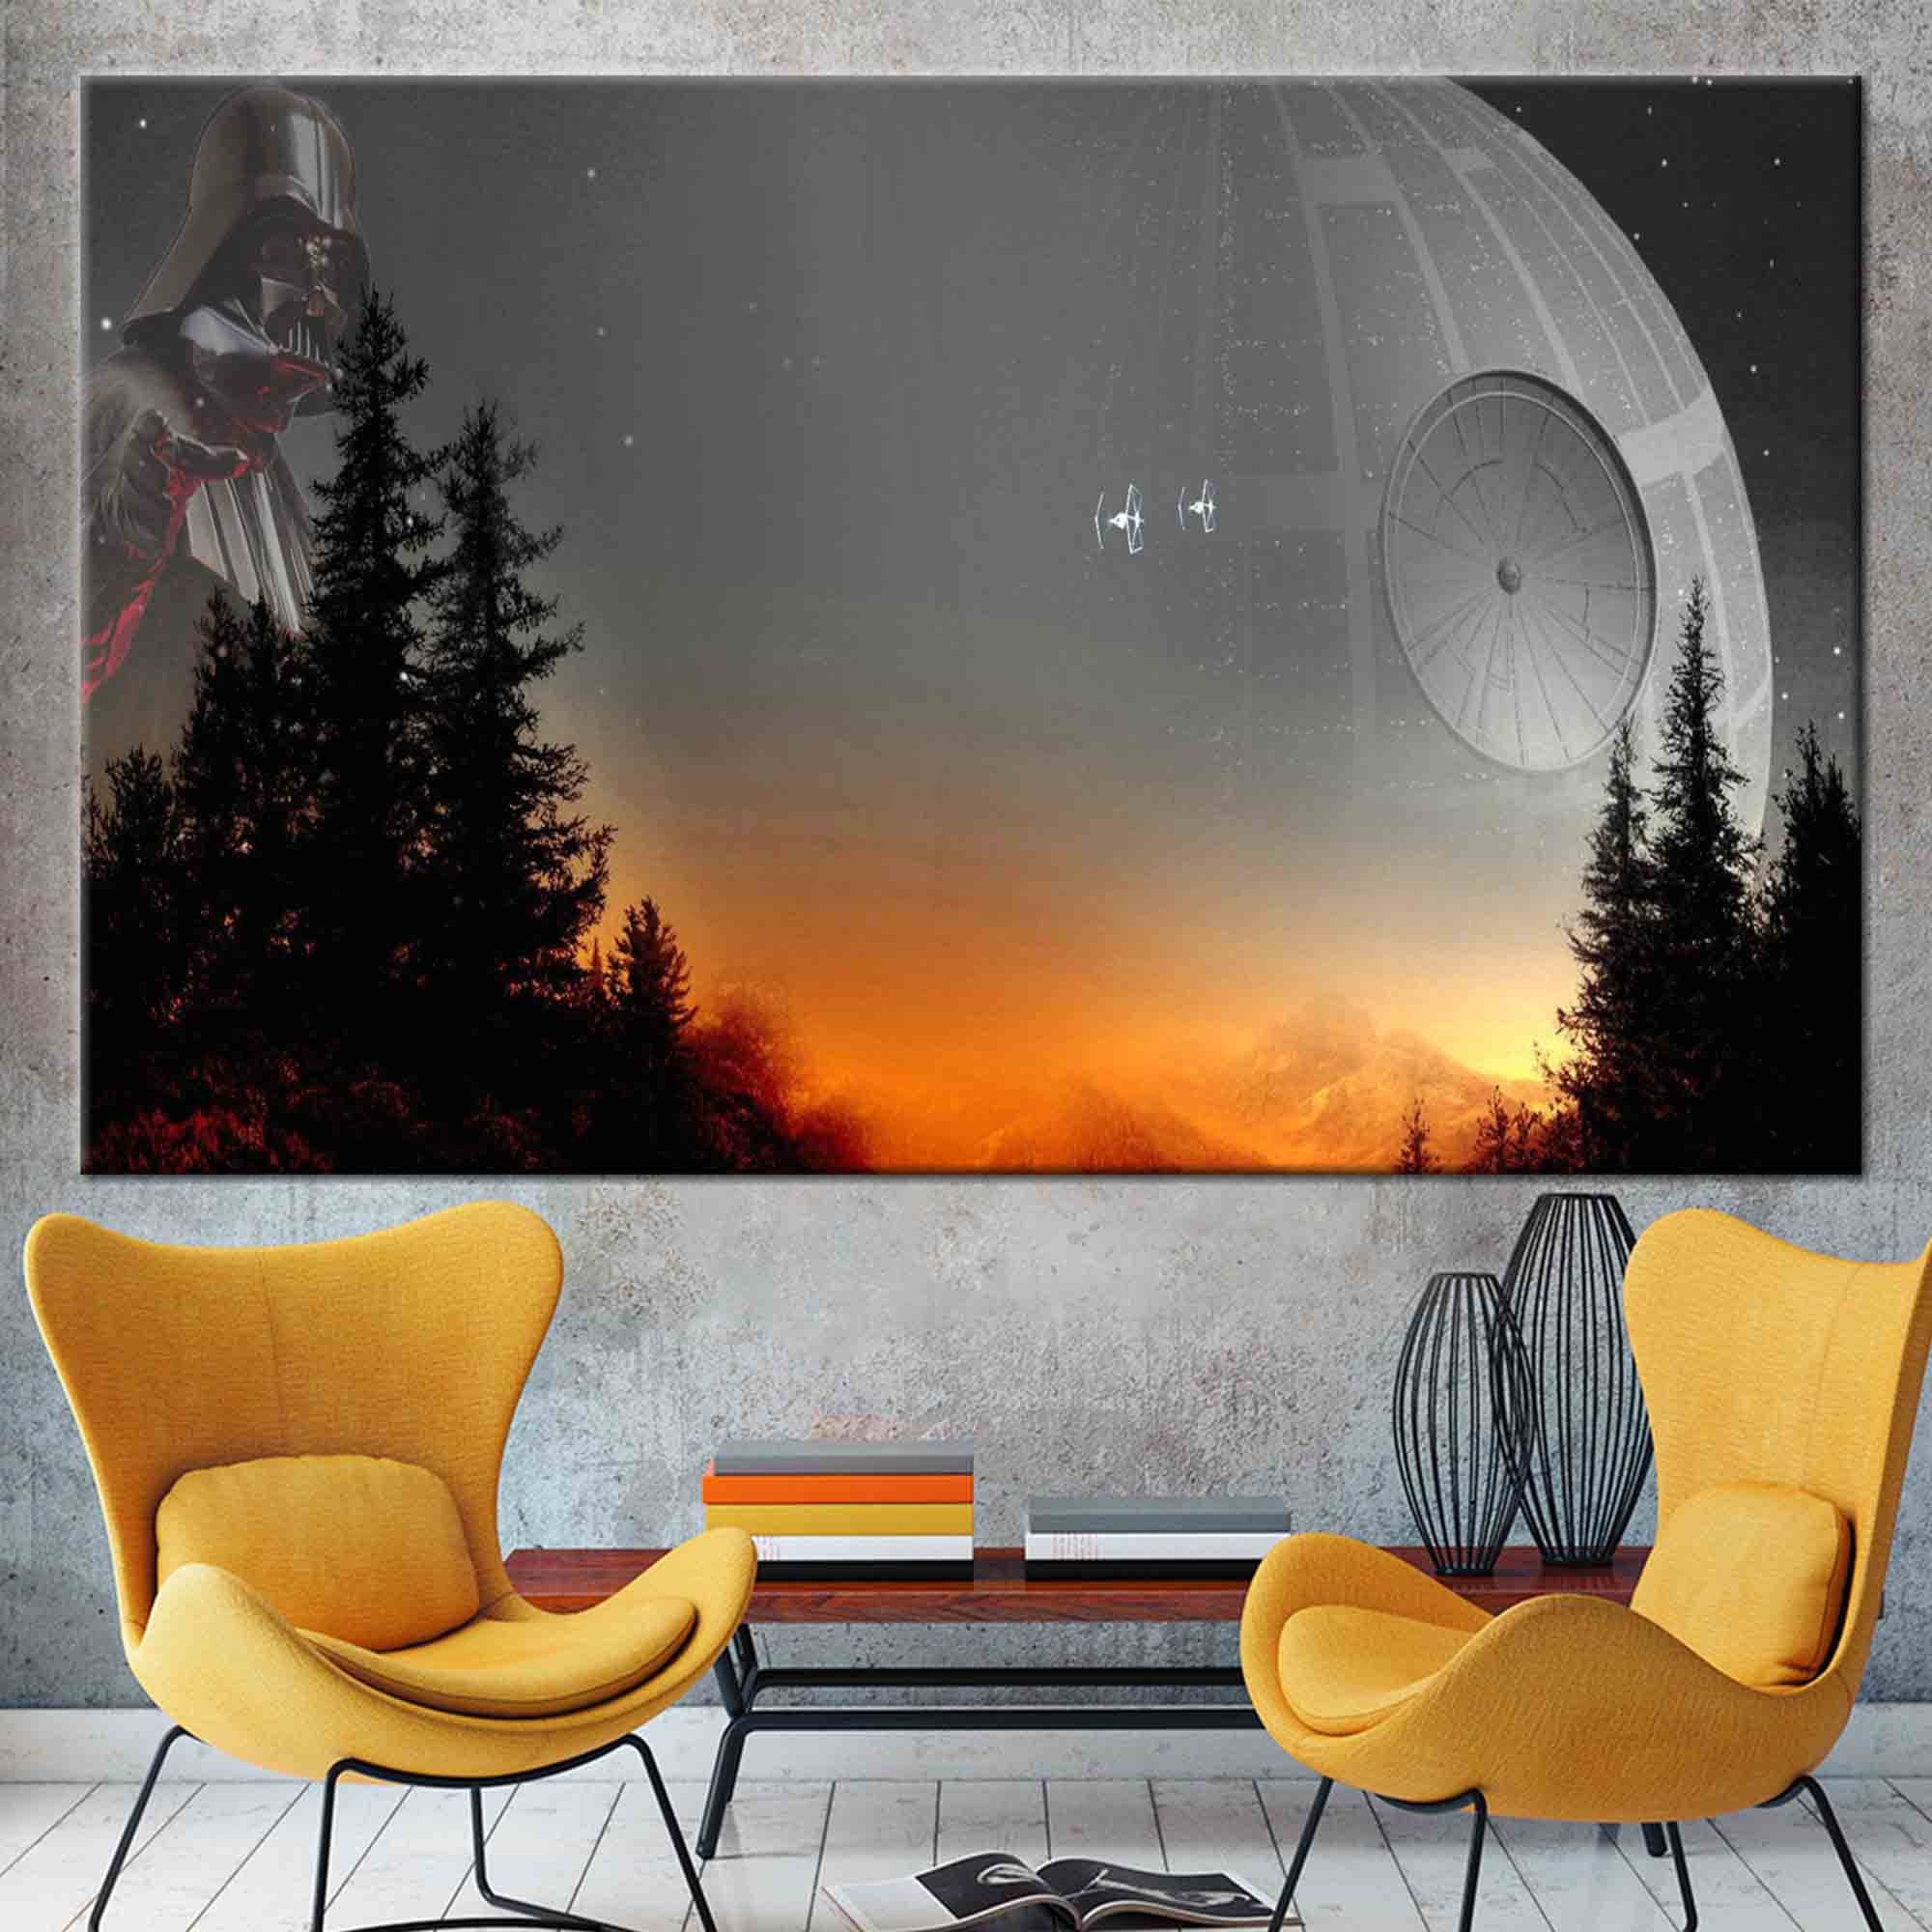 Star Wars, Death Star Canvas, Star Wars Poster, Star Wars Canvas, Star Wars Wall Art, Space Wall Art, Space Canvas, Abstract Wall Art,